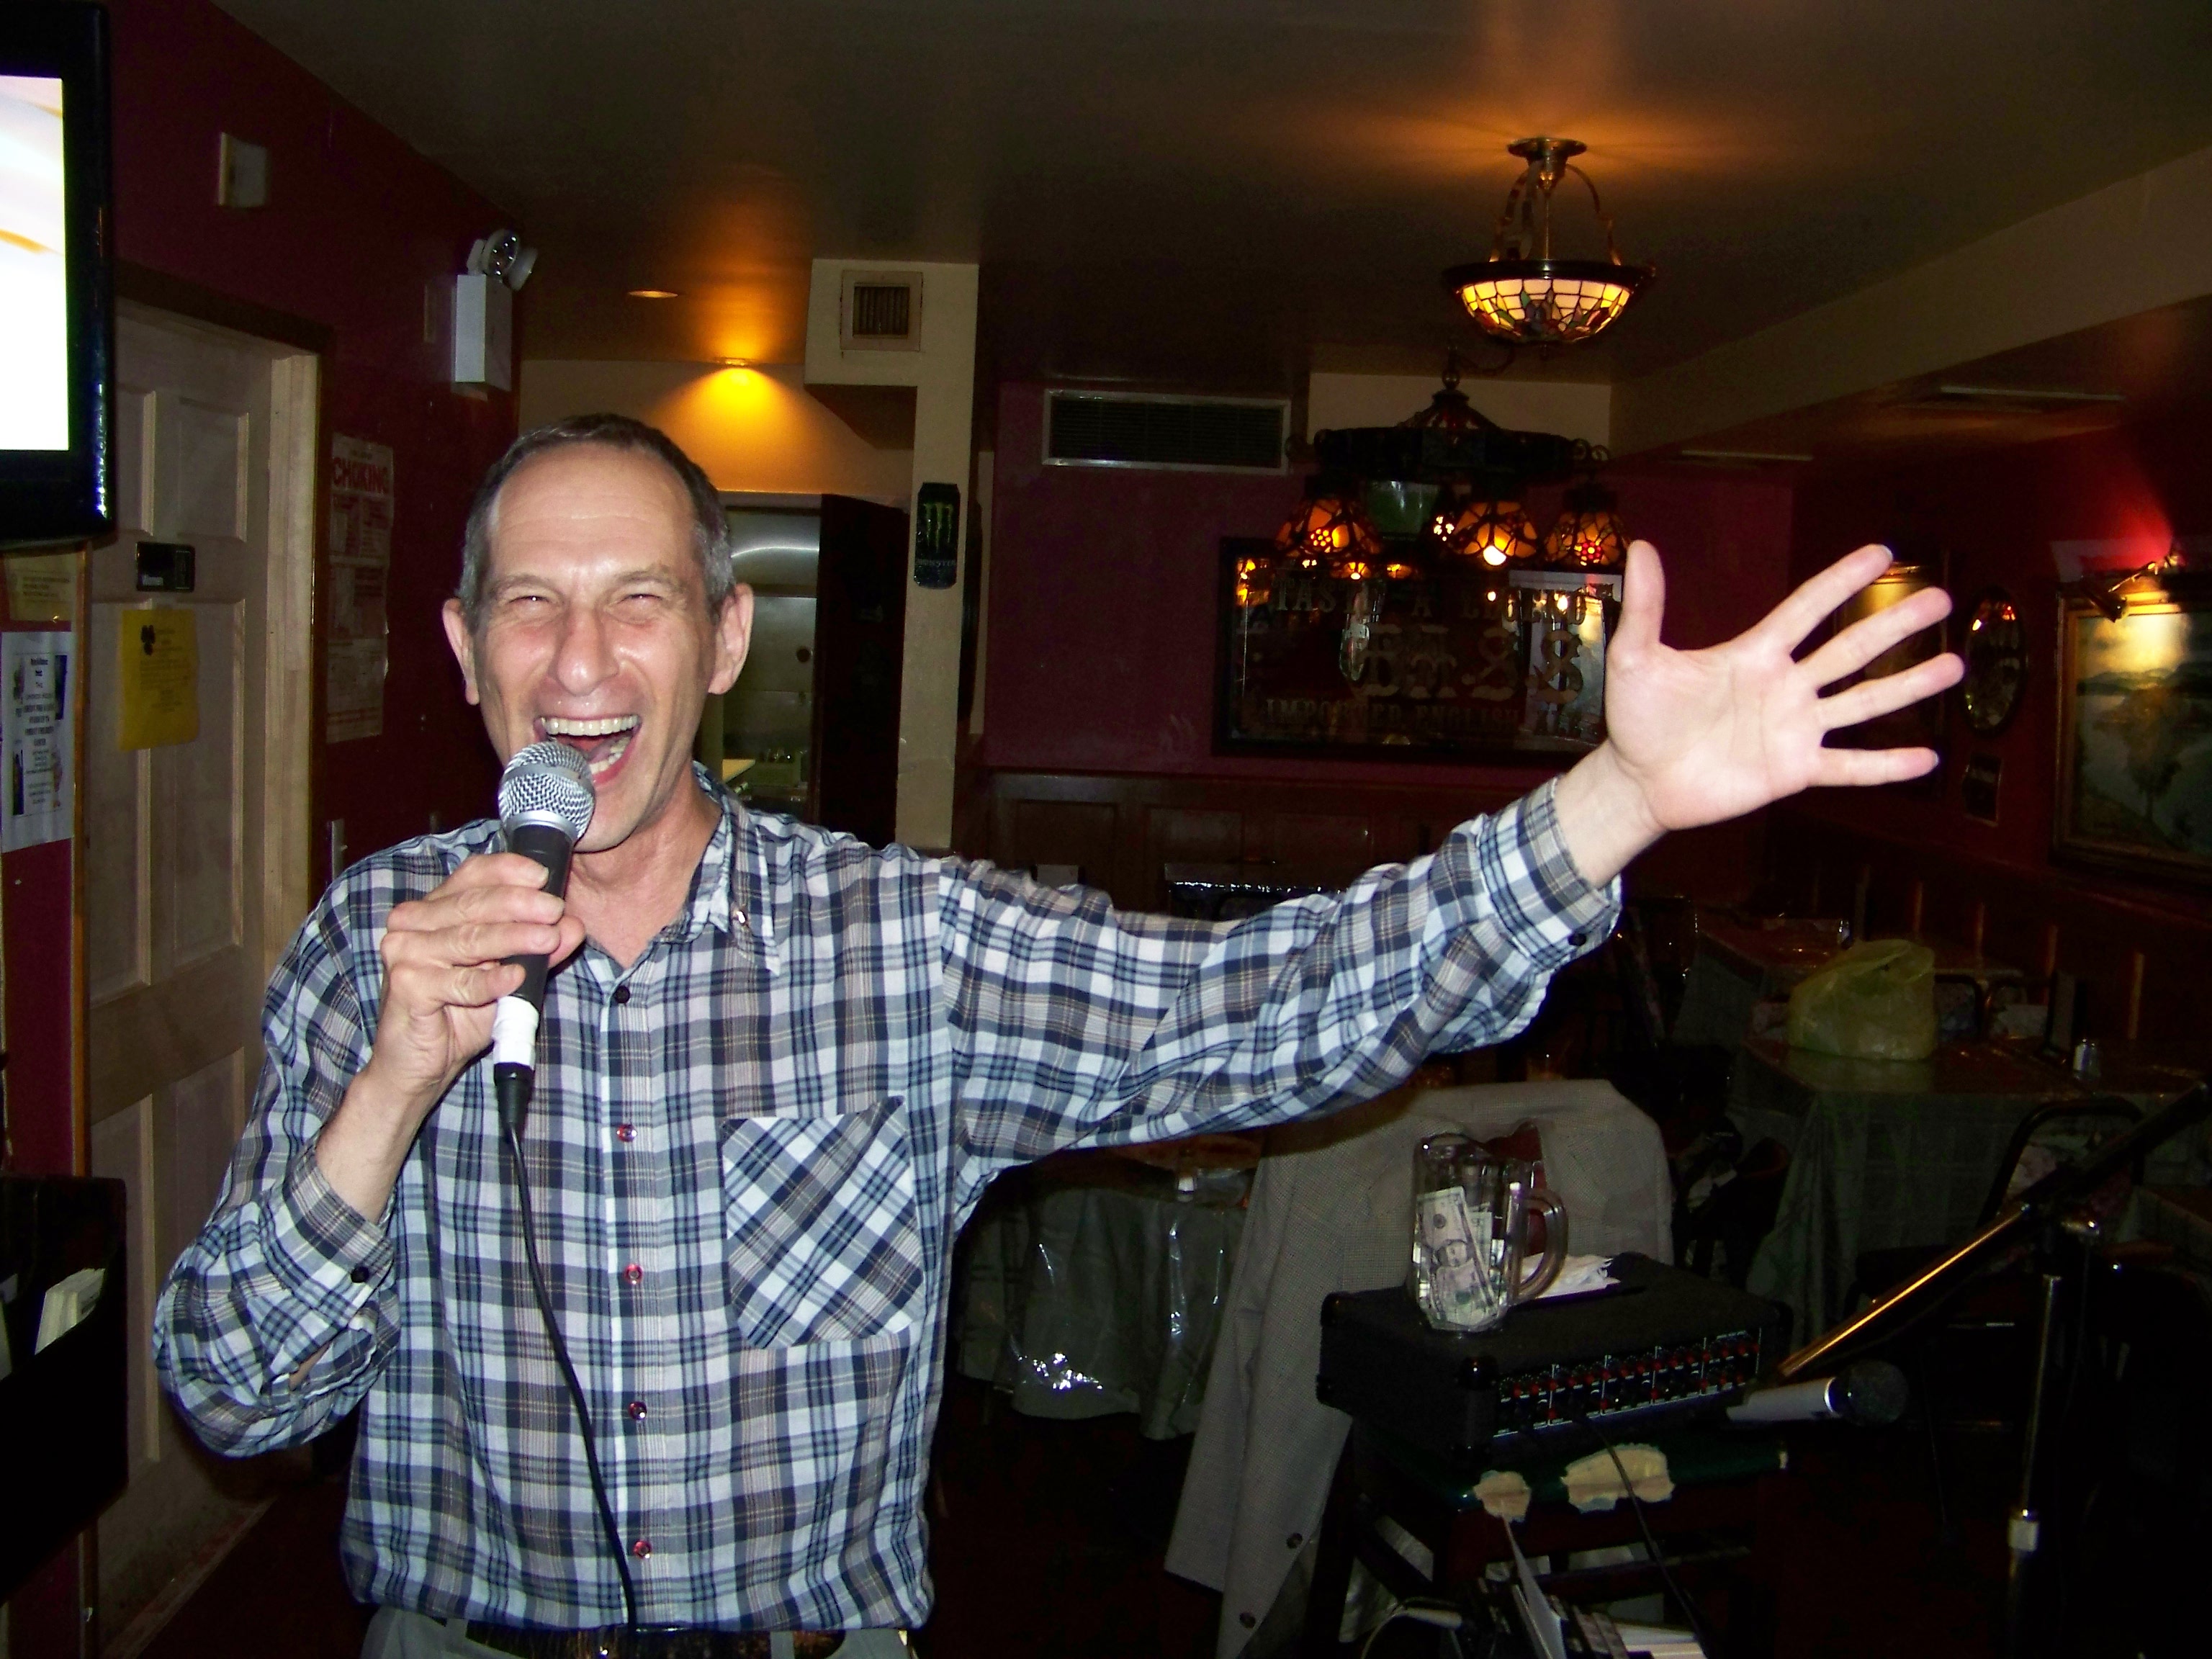 (date posted). Phillip W. Weiss singing at a restaurant in New York City, May 2009.